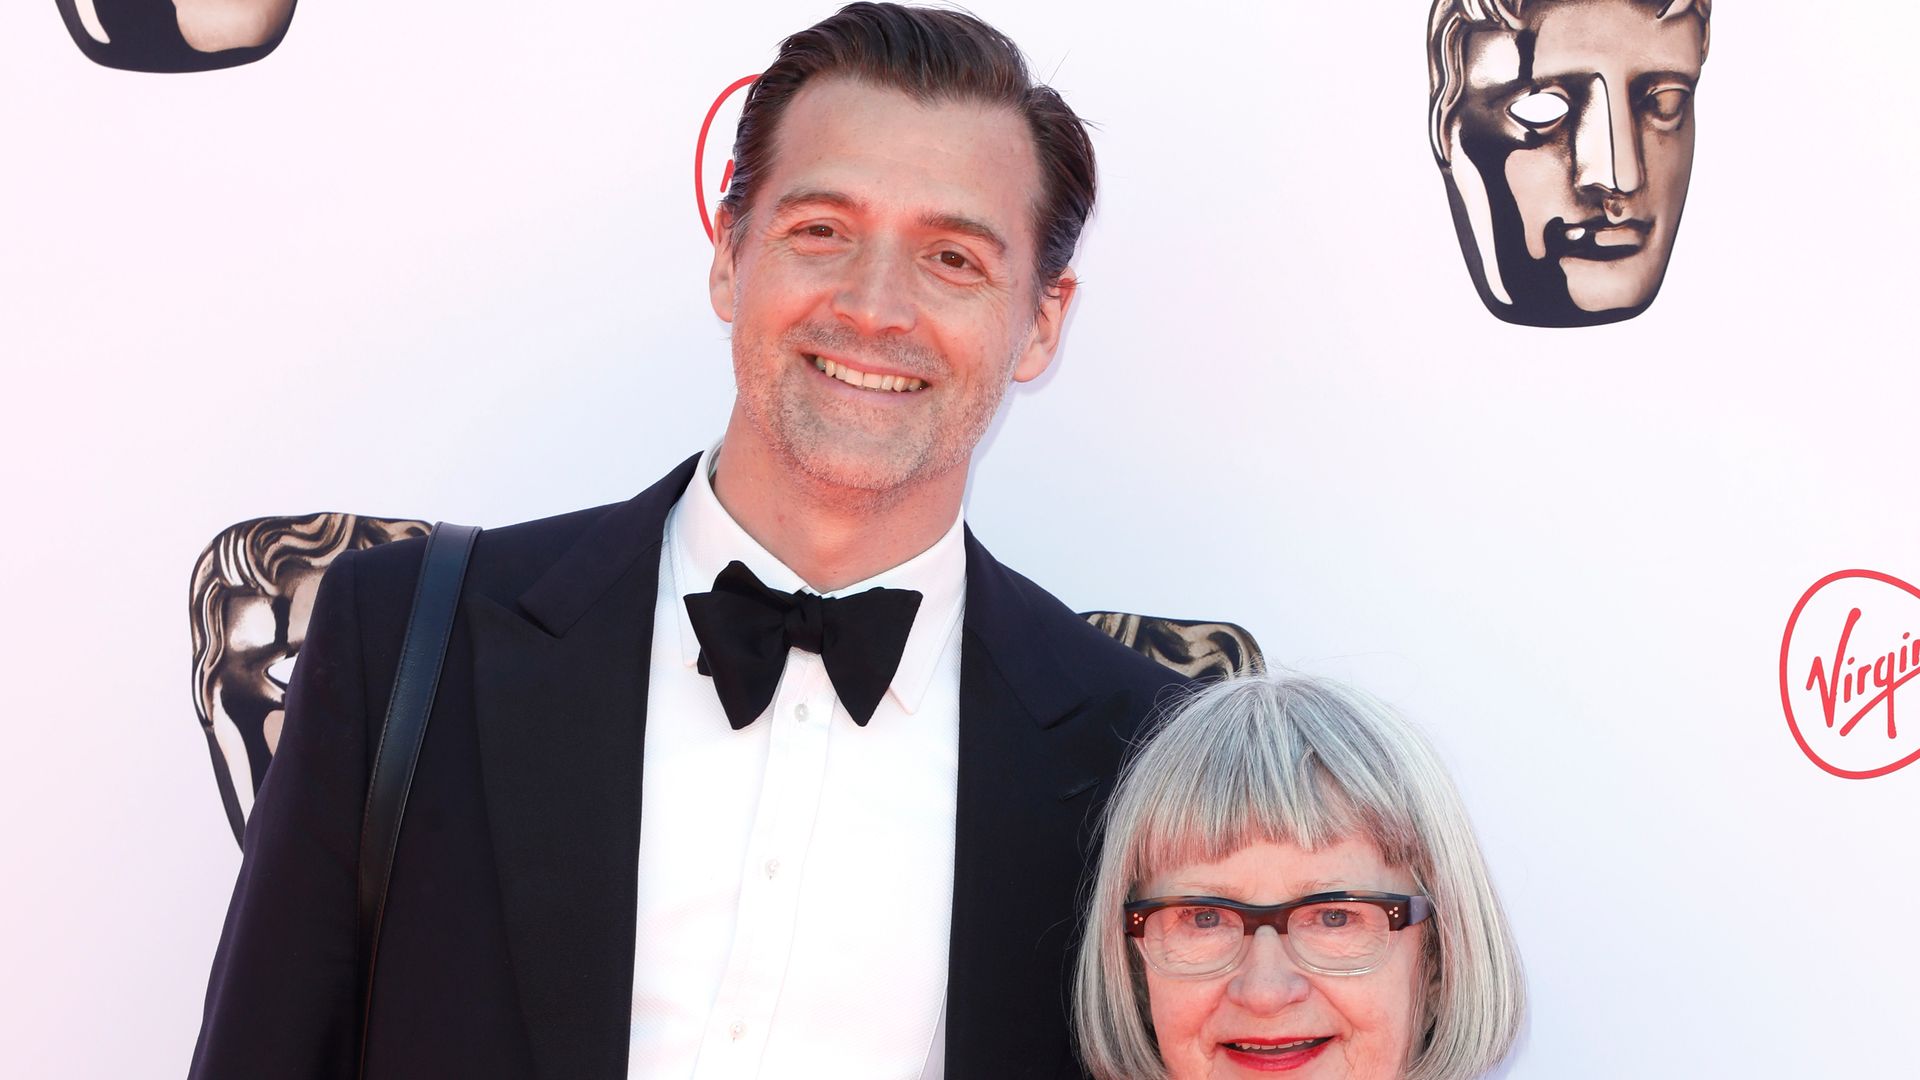 Patrick Grant in a tuxedo with Esme Young in a silver dress